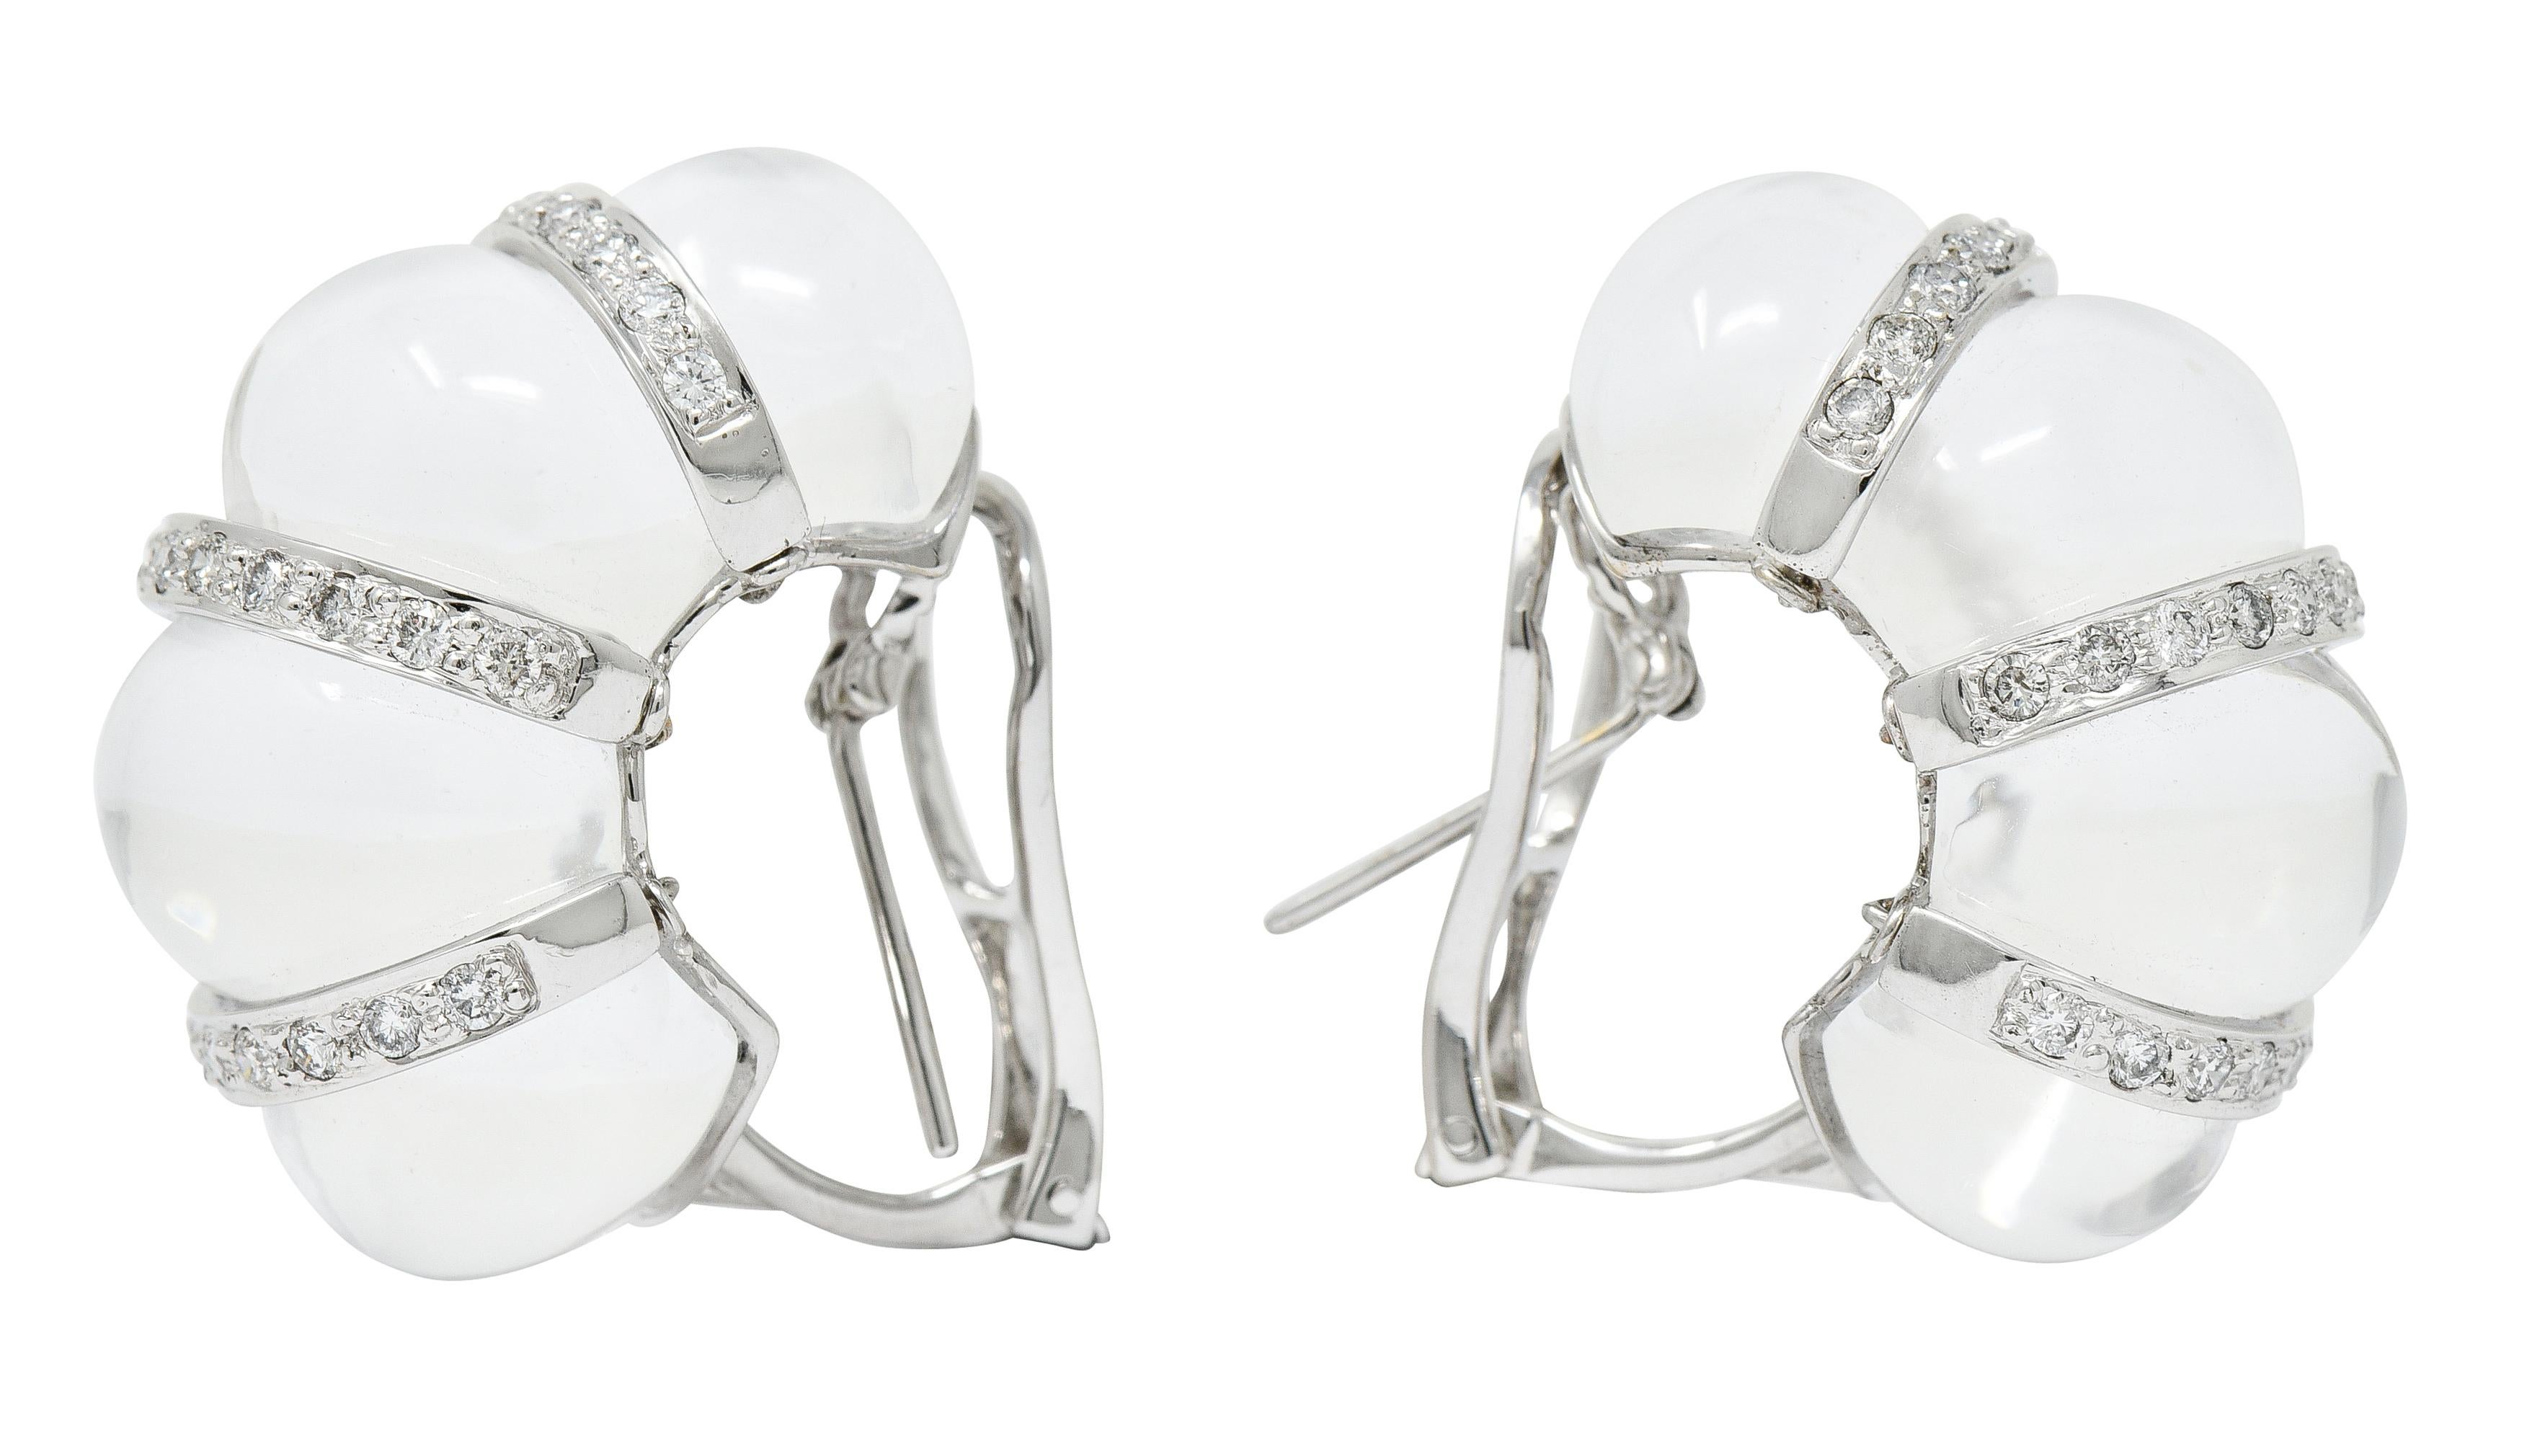 Substantial J hoop style earrings feature carved rock crystal quartz cabochons

With white gold bands, East to West, bead set with round brilliant cut diamonds

Weighing in total approximately 1.50 carats with G/H color and SI clarity

Completed by